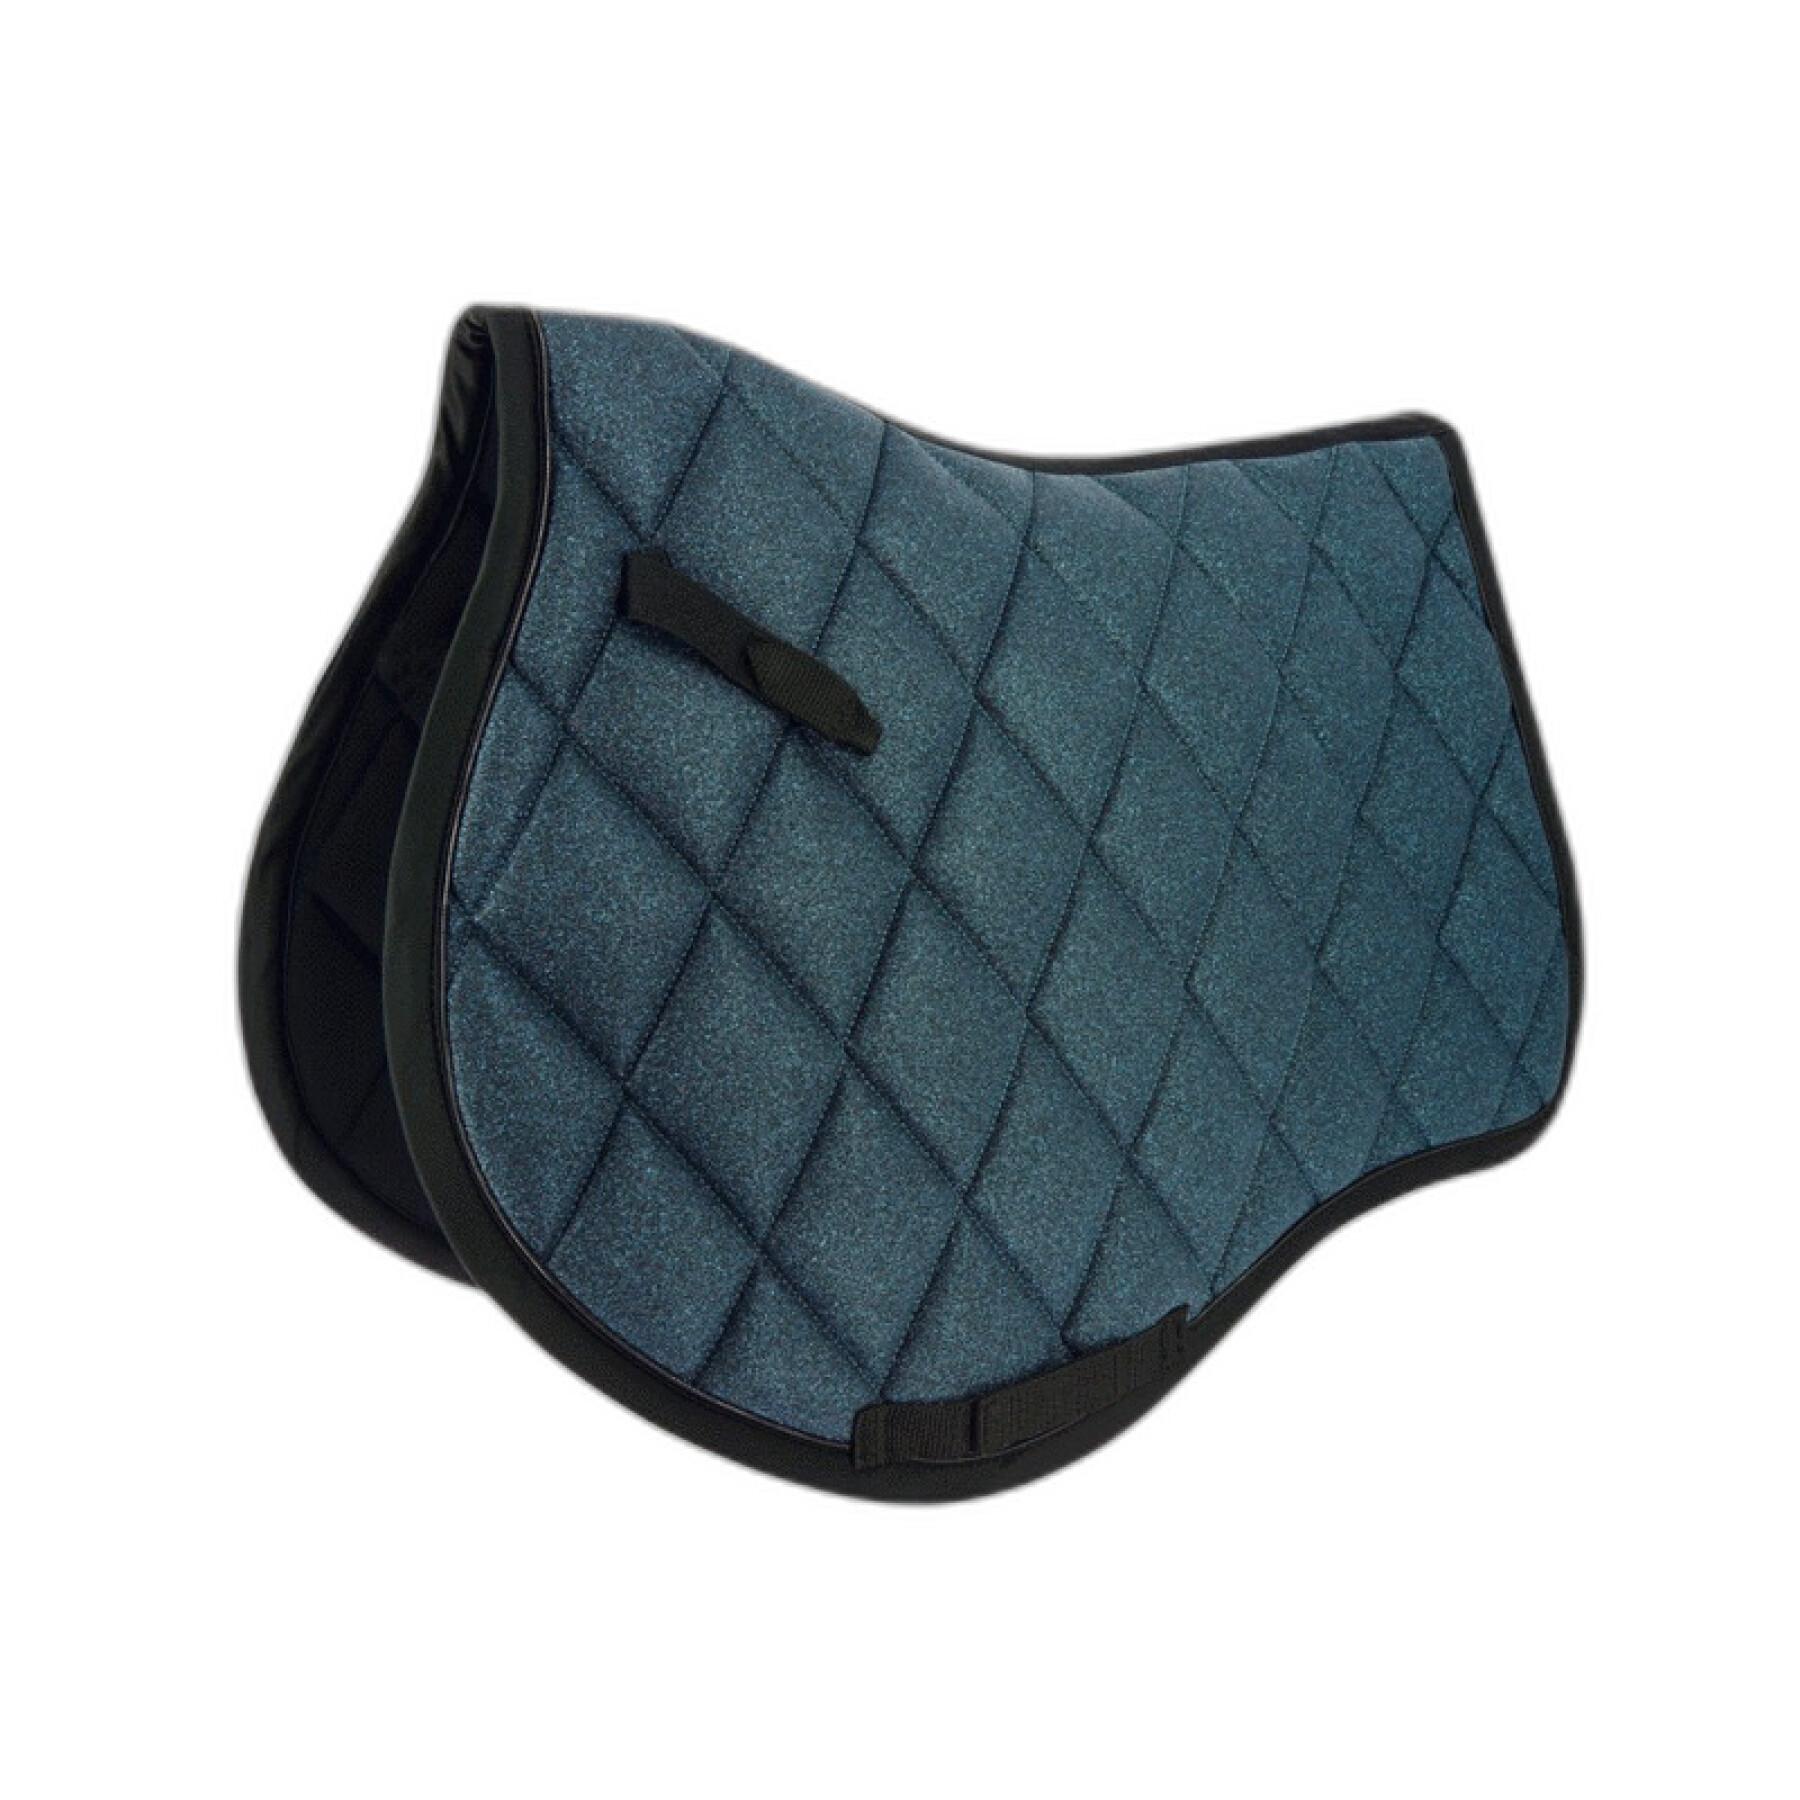 Saddle pad for horses Equithème Glitter